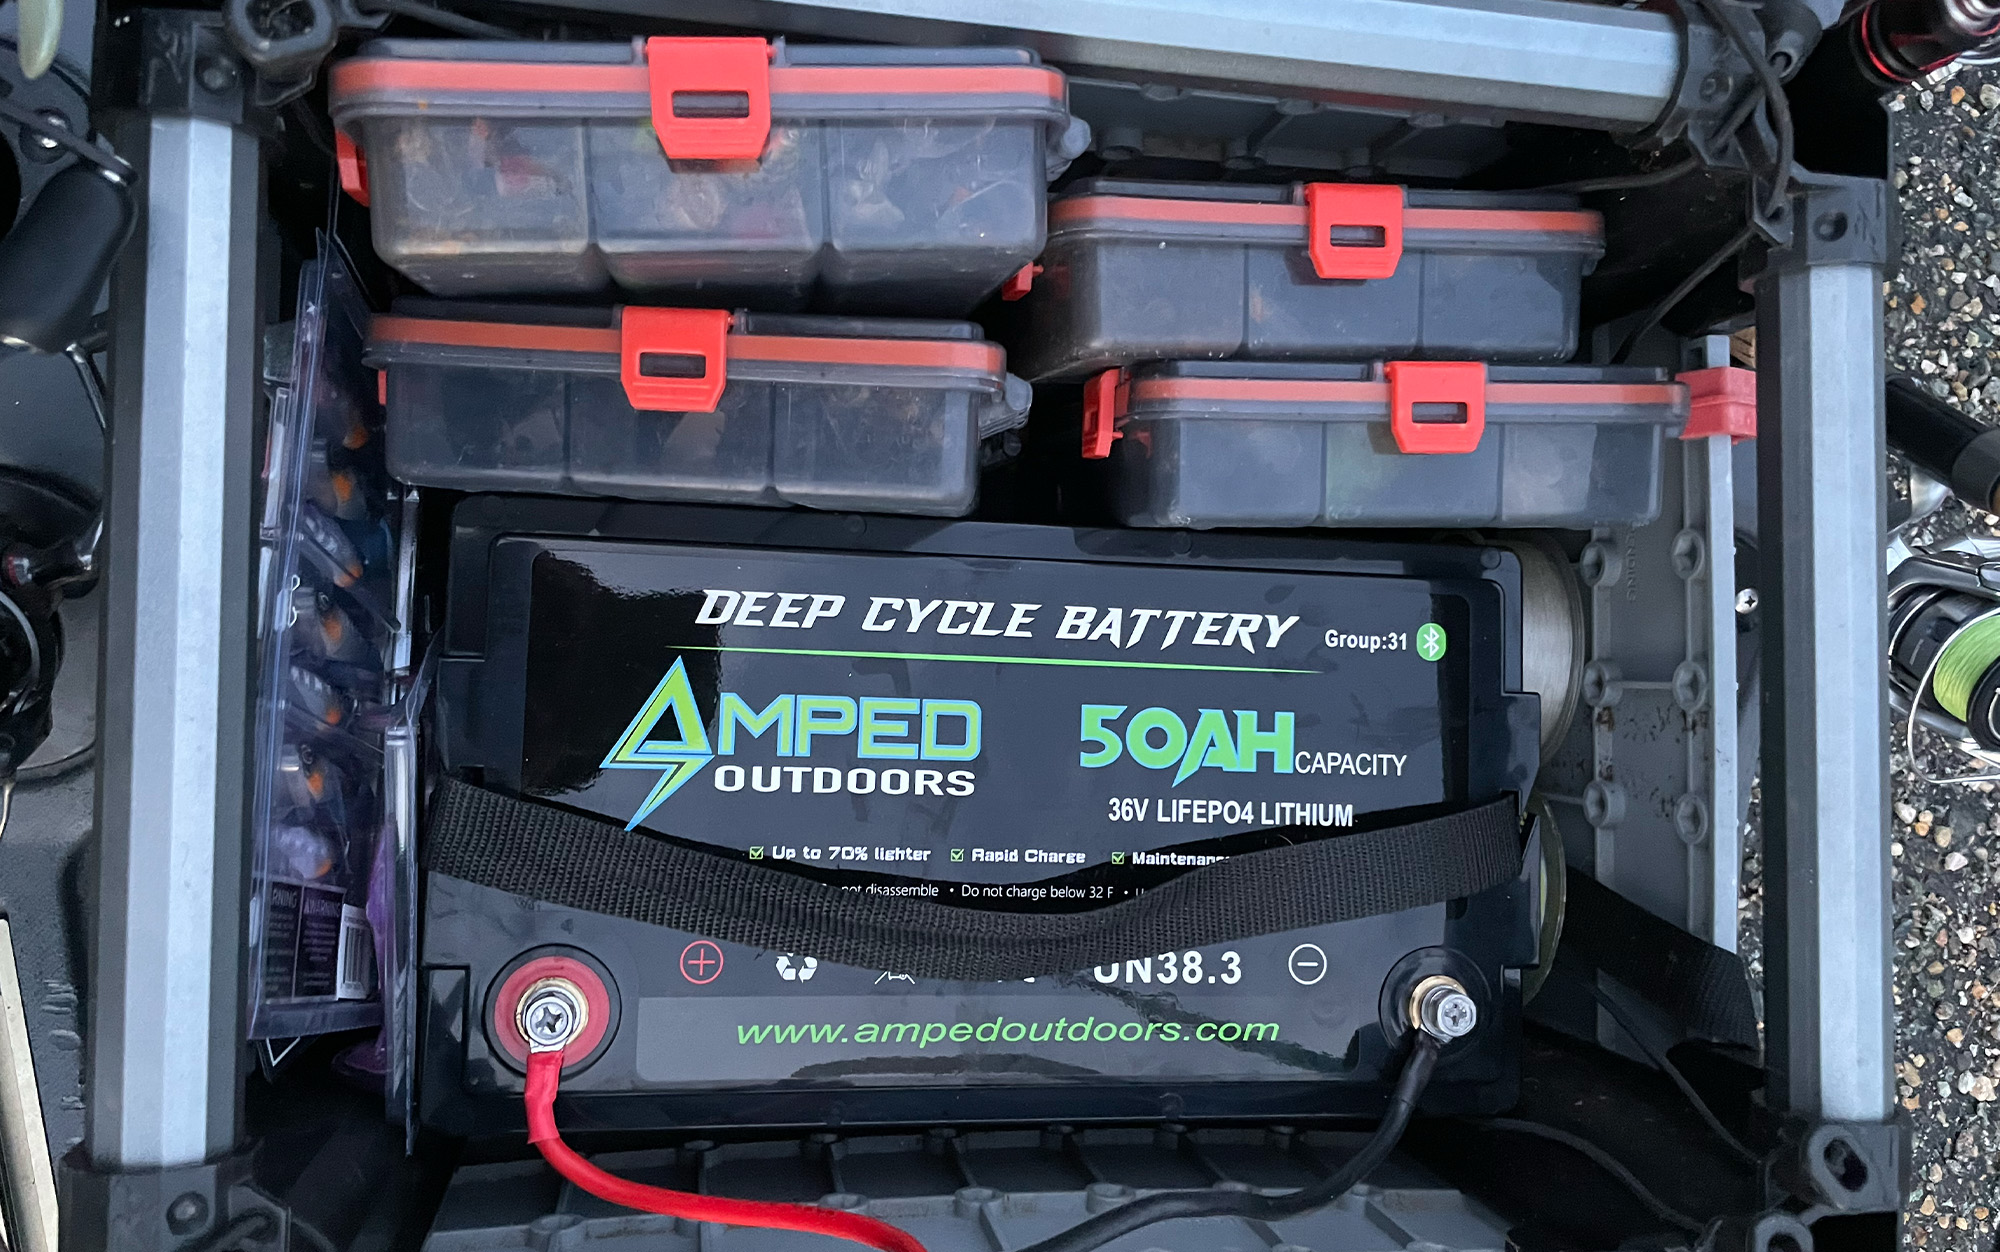 The Amped Outdoors battery easily fits inside a Hobie H crate.